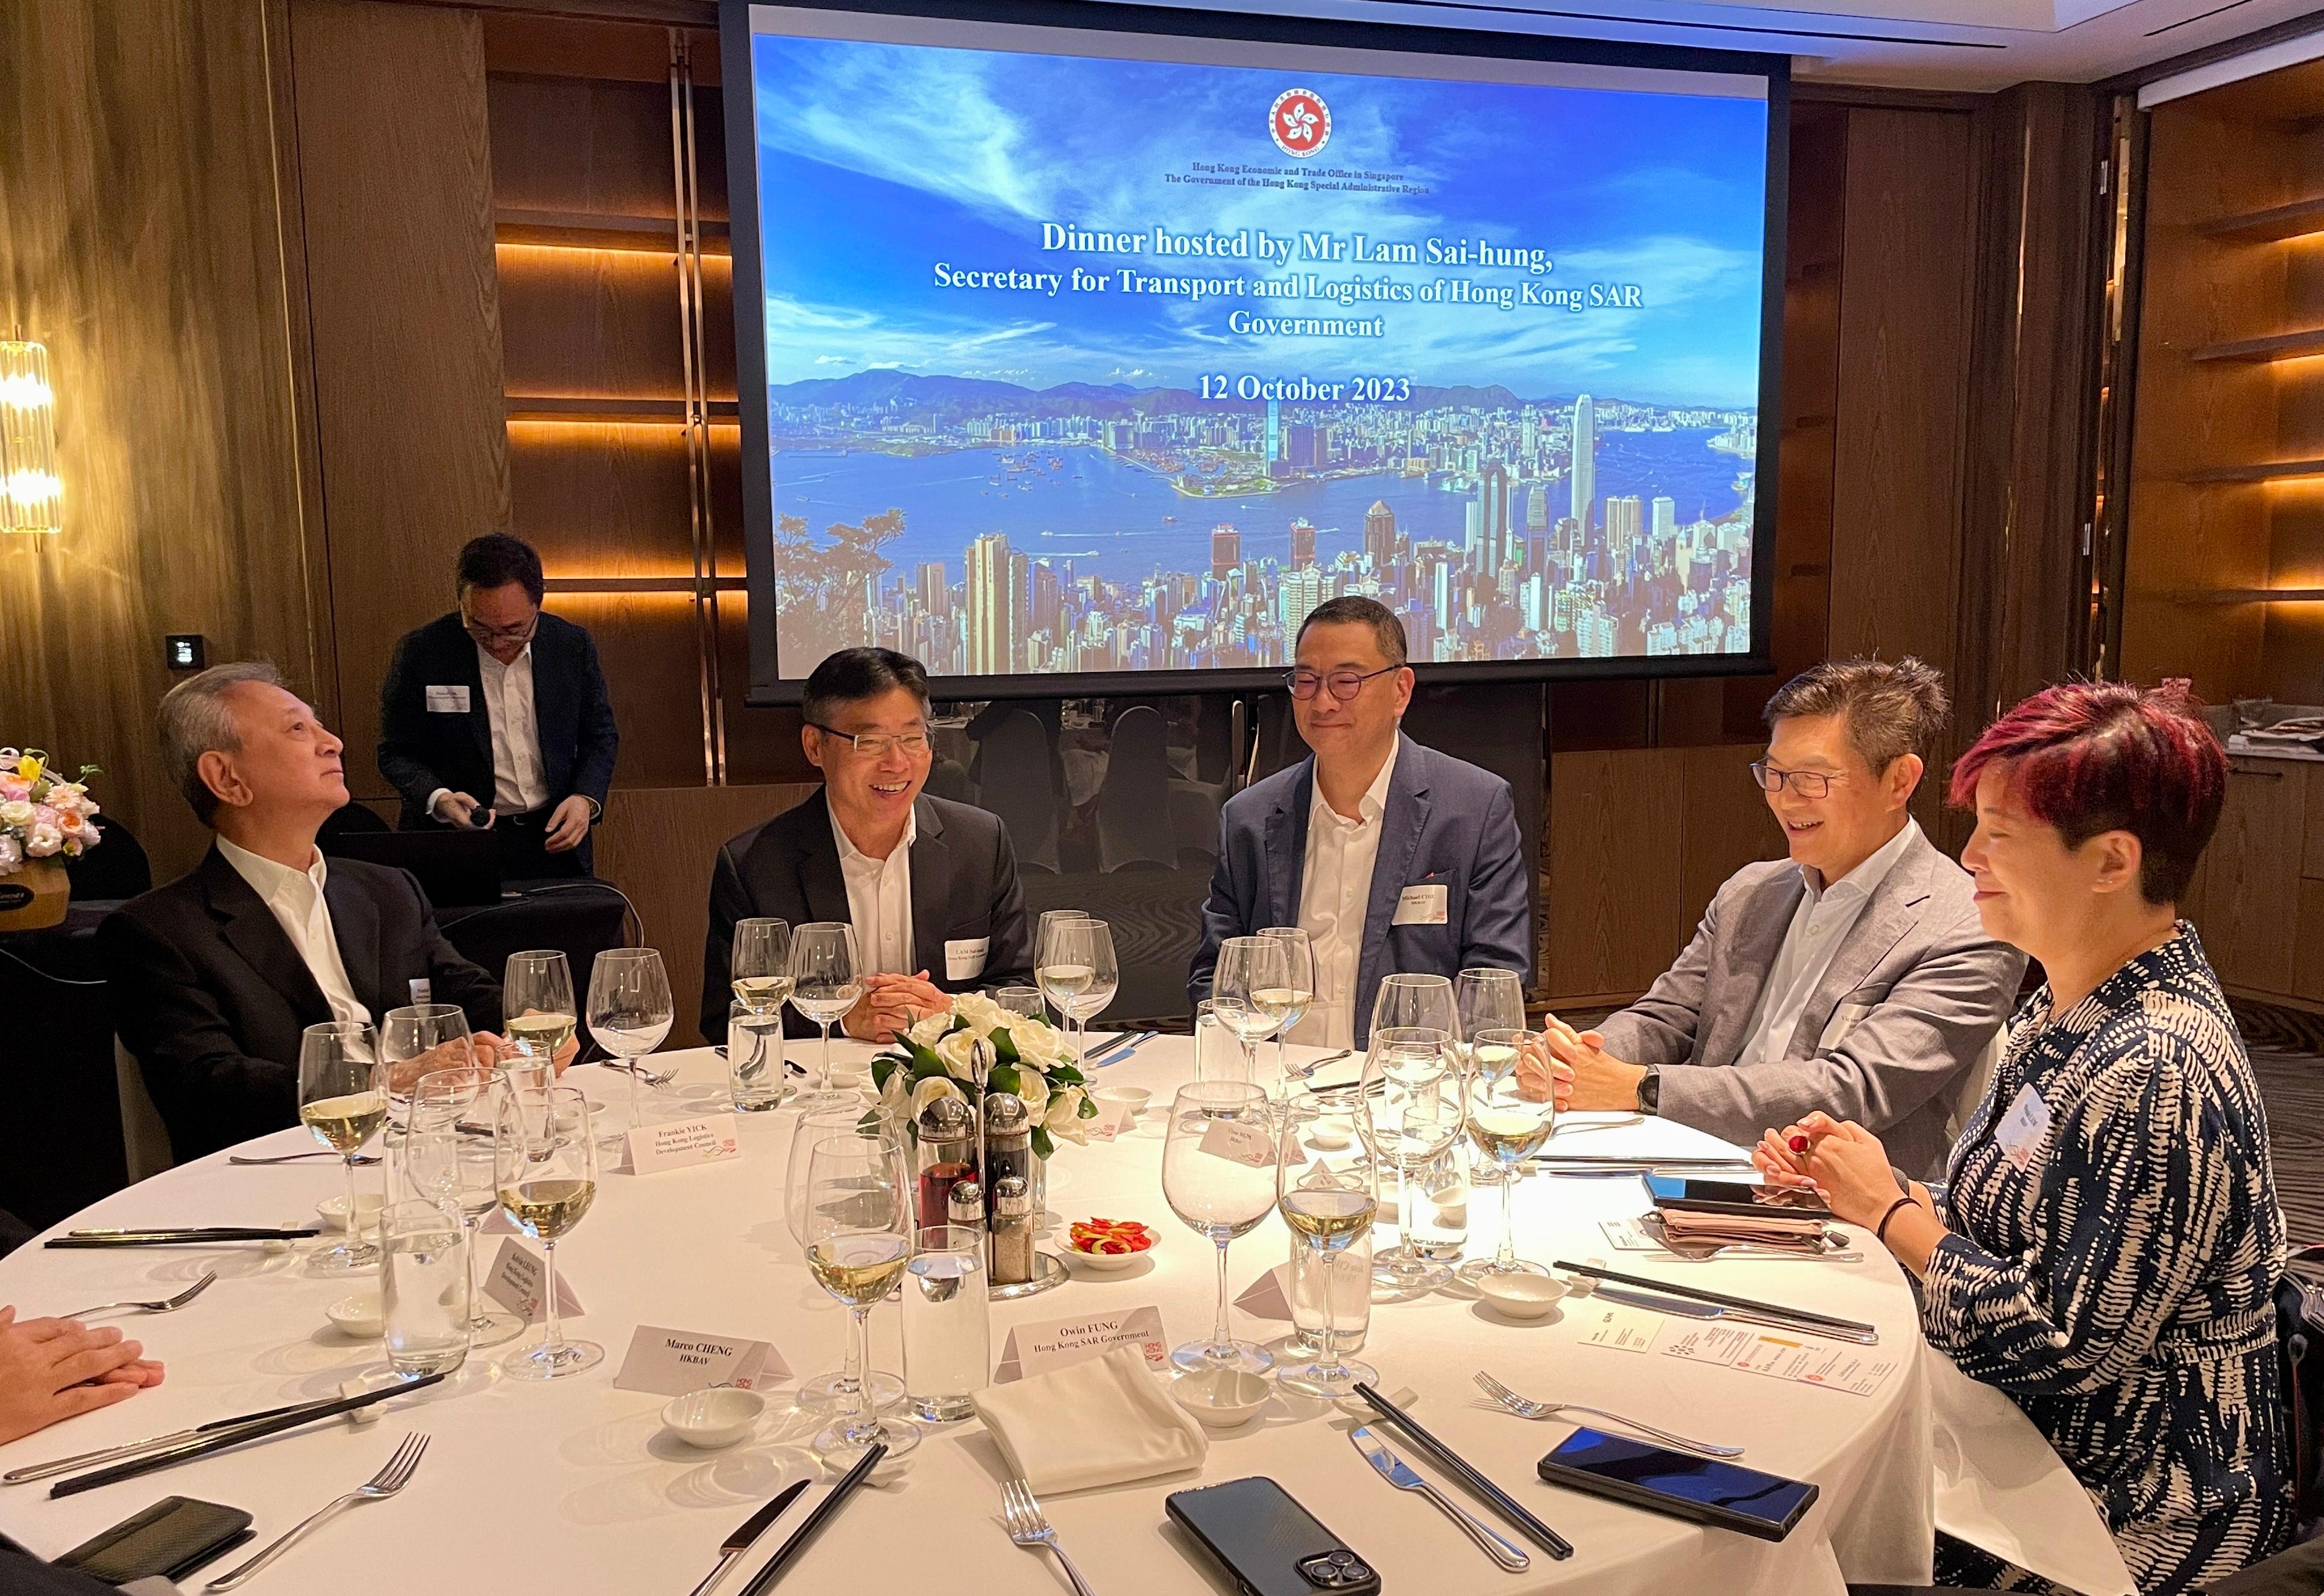 The Secretary for Transport and Logistics, Mr Lam Sai-hung (second left), together with members of the Hong Kong Logistics Development Council delegation, today (October 12) attended a dinner with representatives from the Hong Kong Business Association Vietnam in Ho Chi Minh City, Vietnam, to understand their business operations in the city.